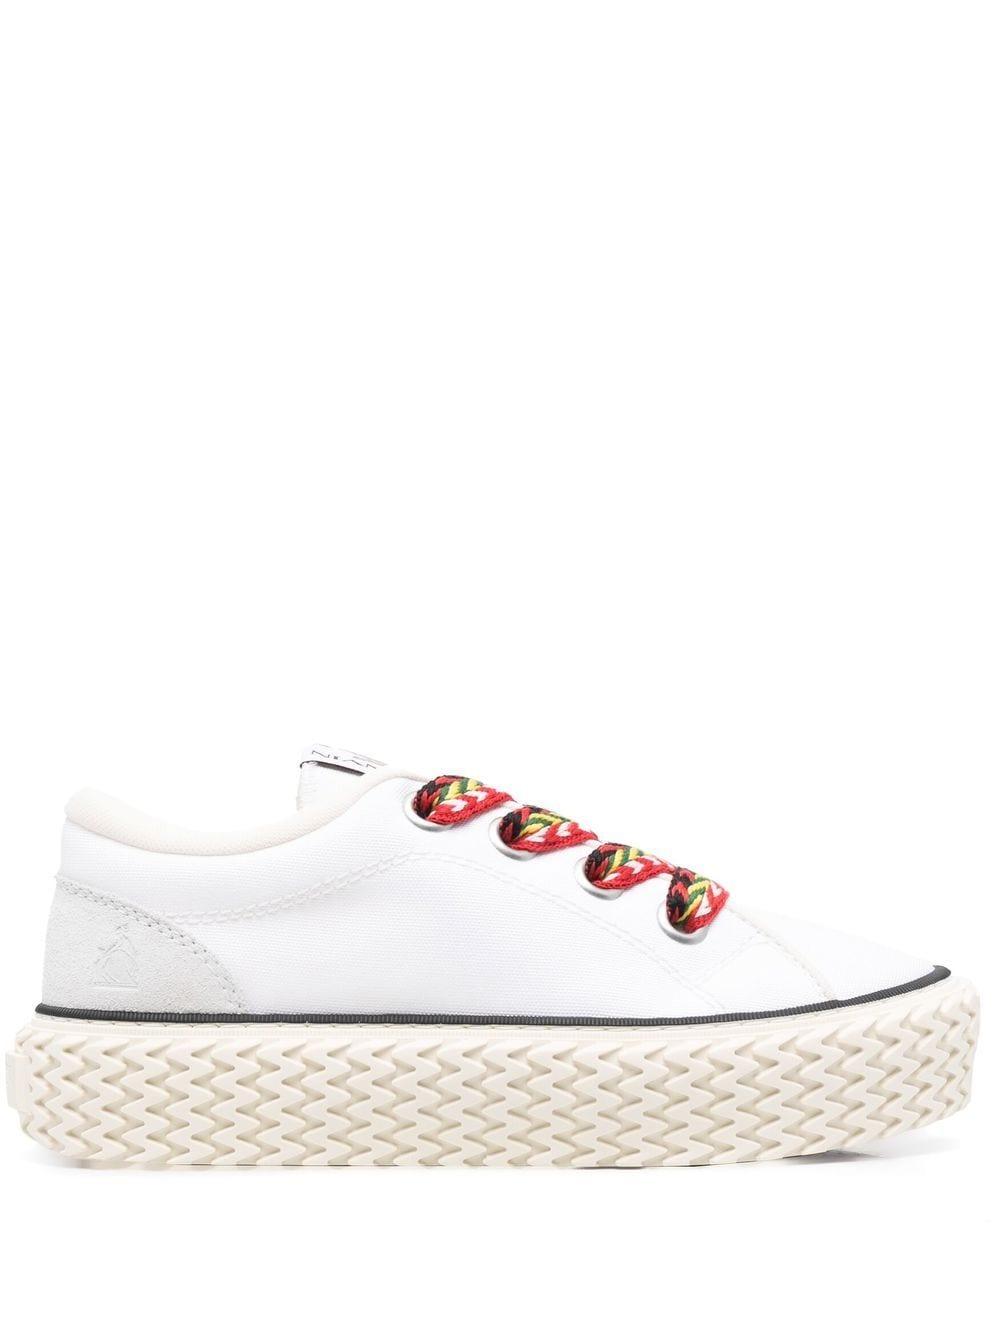 Lanvin Platform Leather Low-top Sneakers in White | Lyst